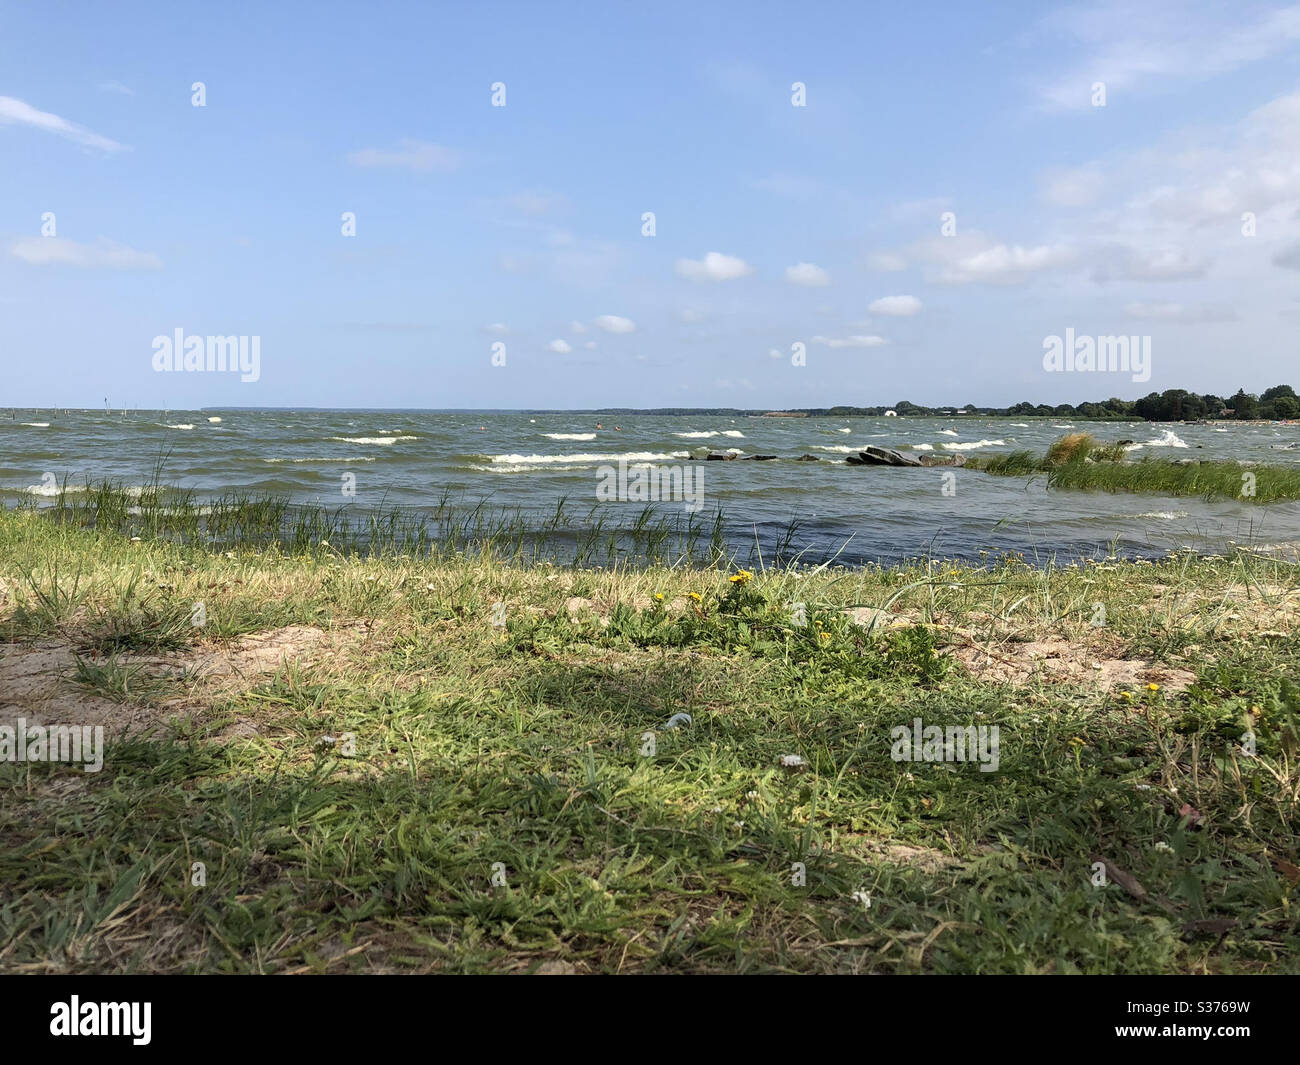 Beautiful landscape view and lake view at the Stettiner Haff in Germany Stock Photo